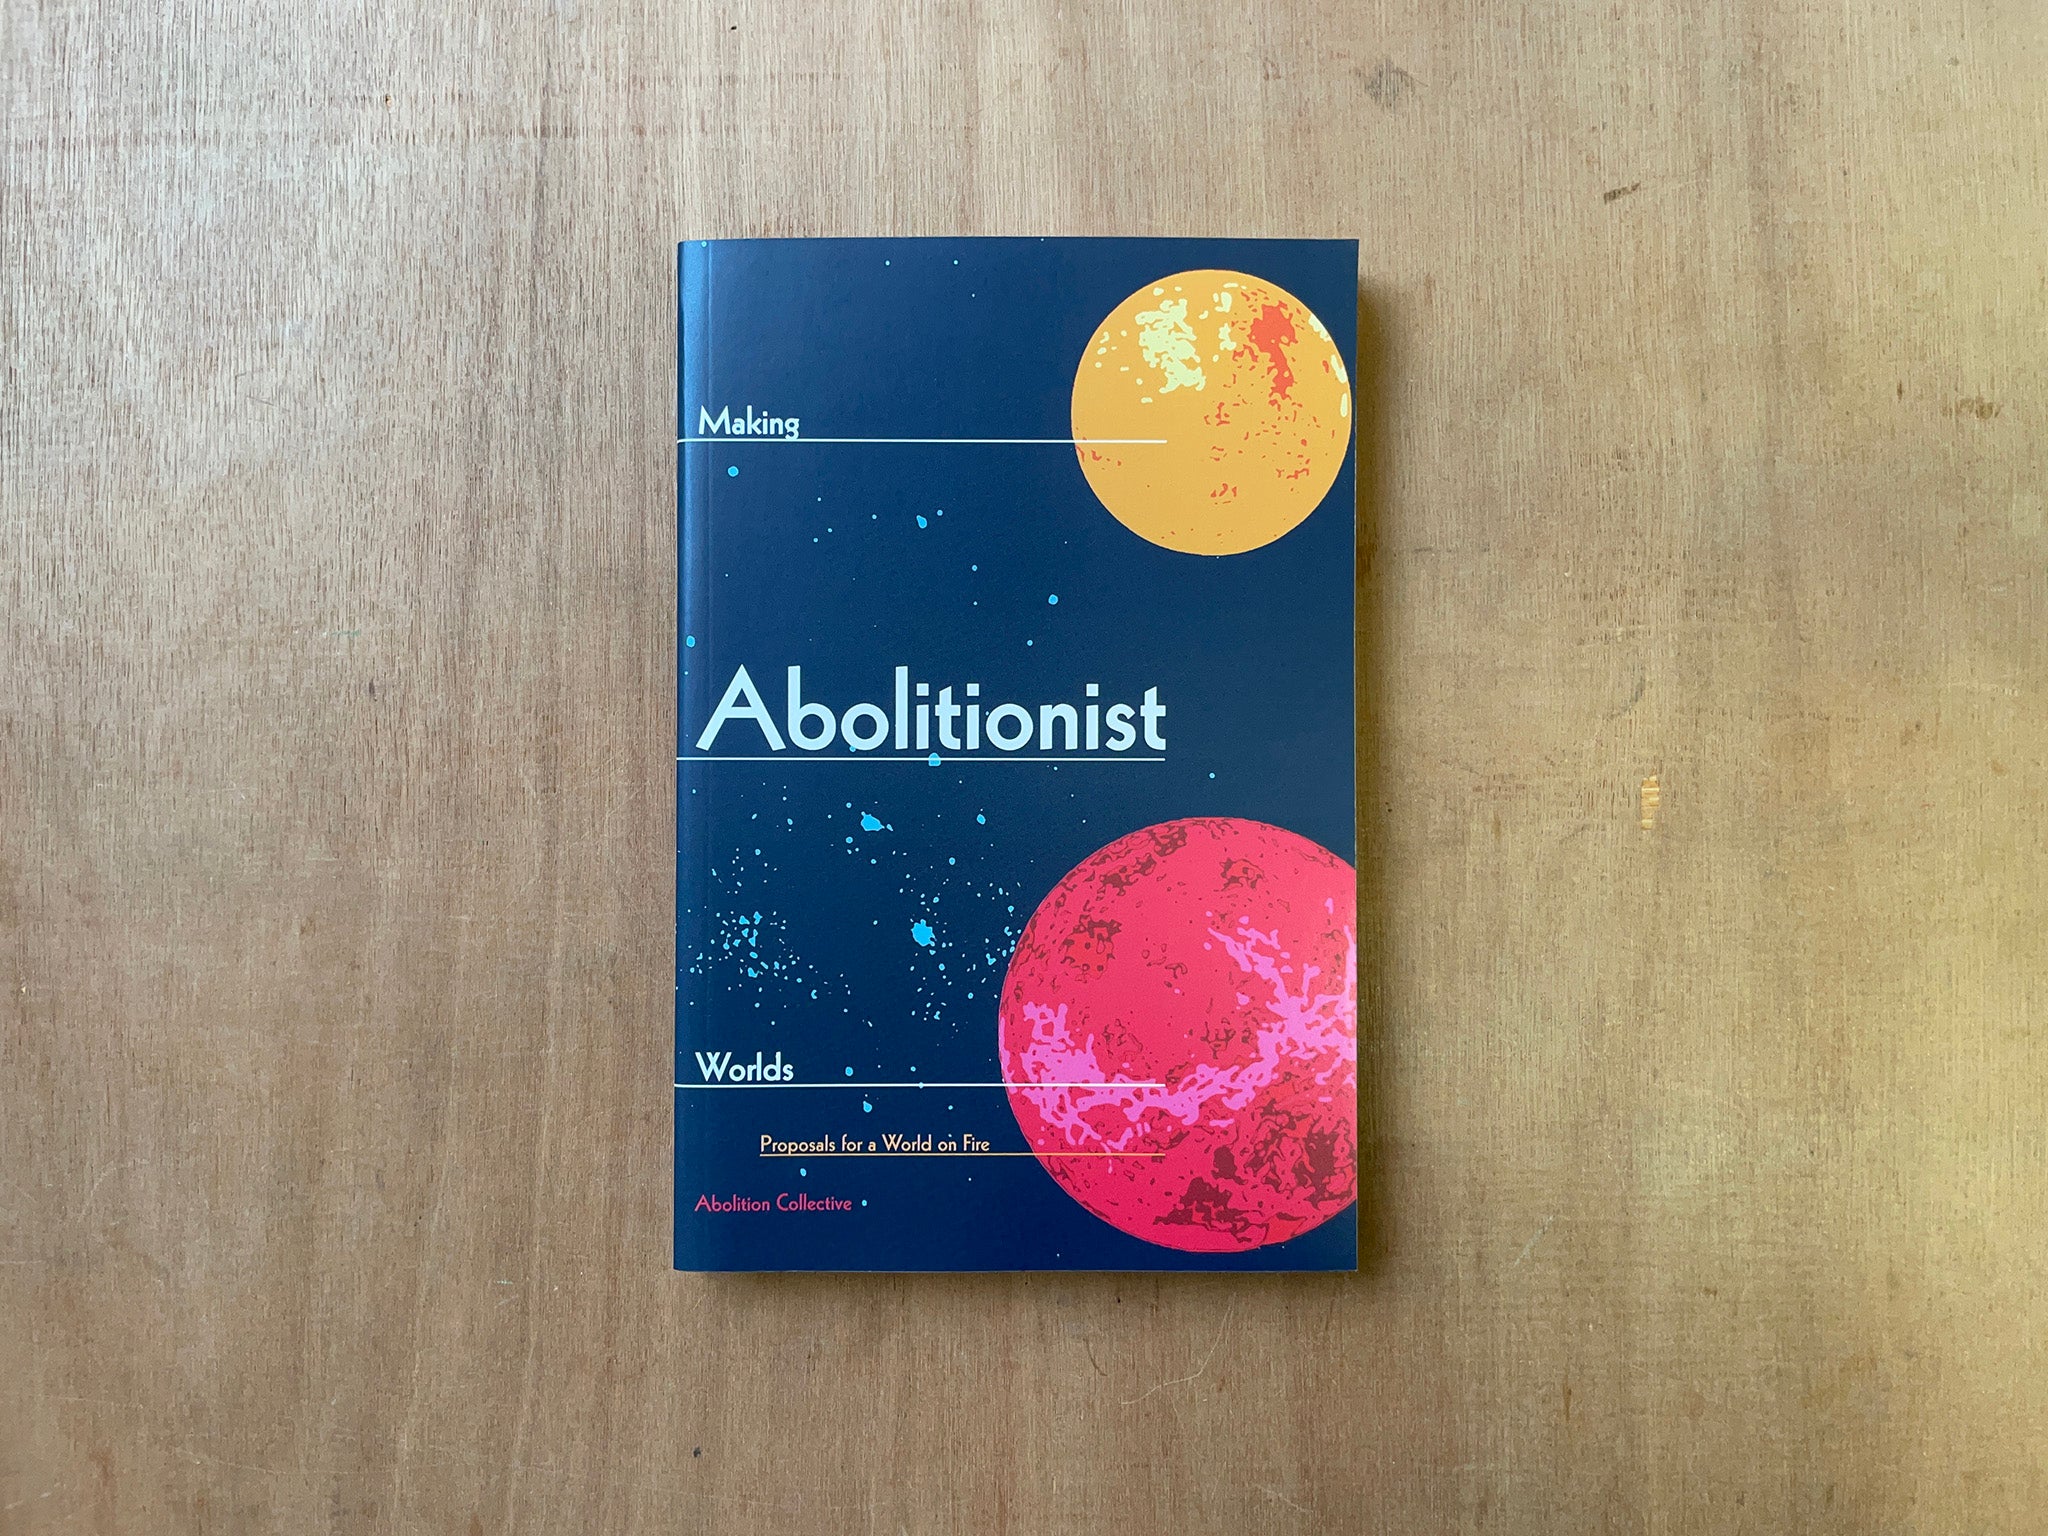 MAKING ABOLITIONIST WORLDS: PROPOSALS FOR A WORLD ON FIRE by Abolition Collective